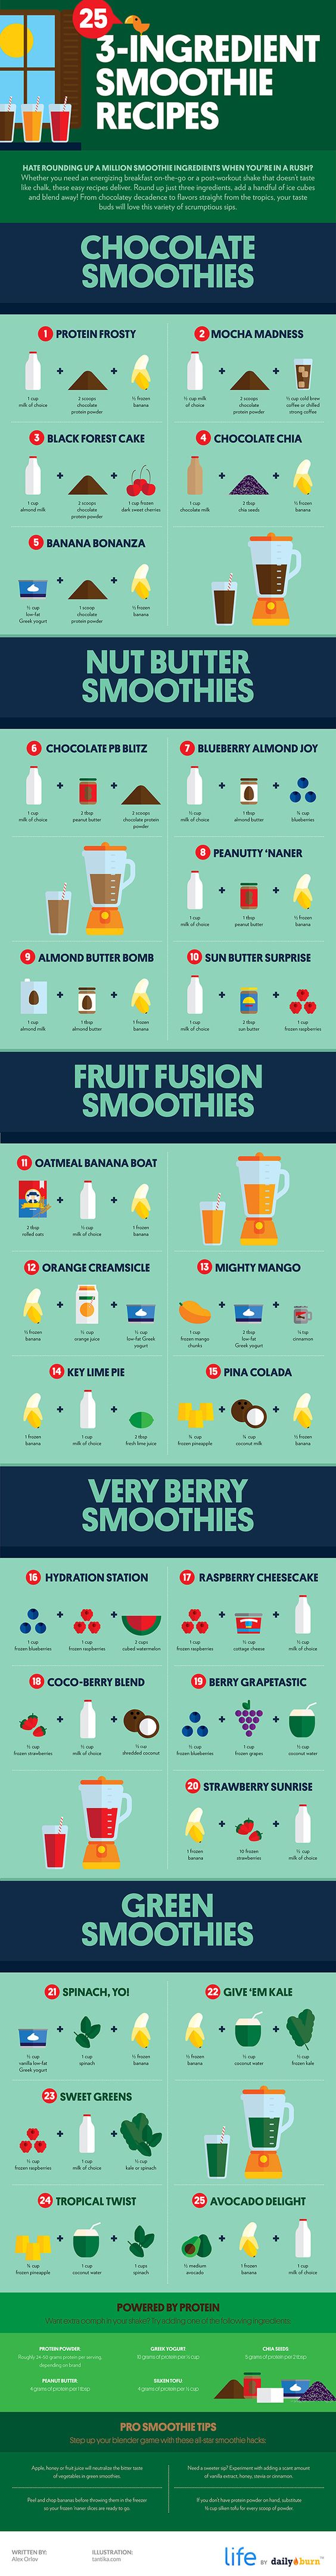 25-3-ingredient-smoothie-recipes-graphic-from-dailyburn